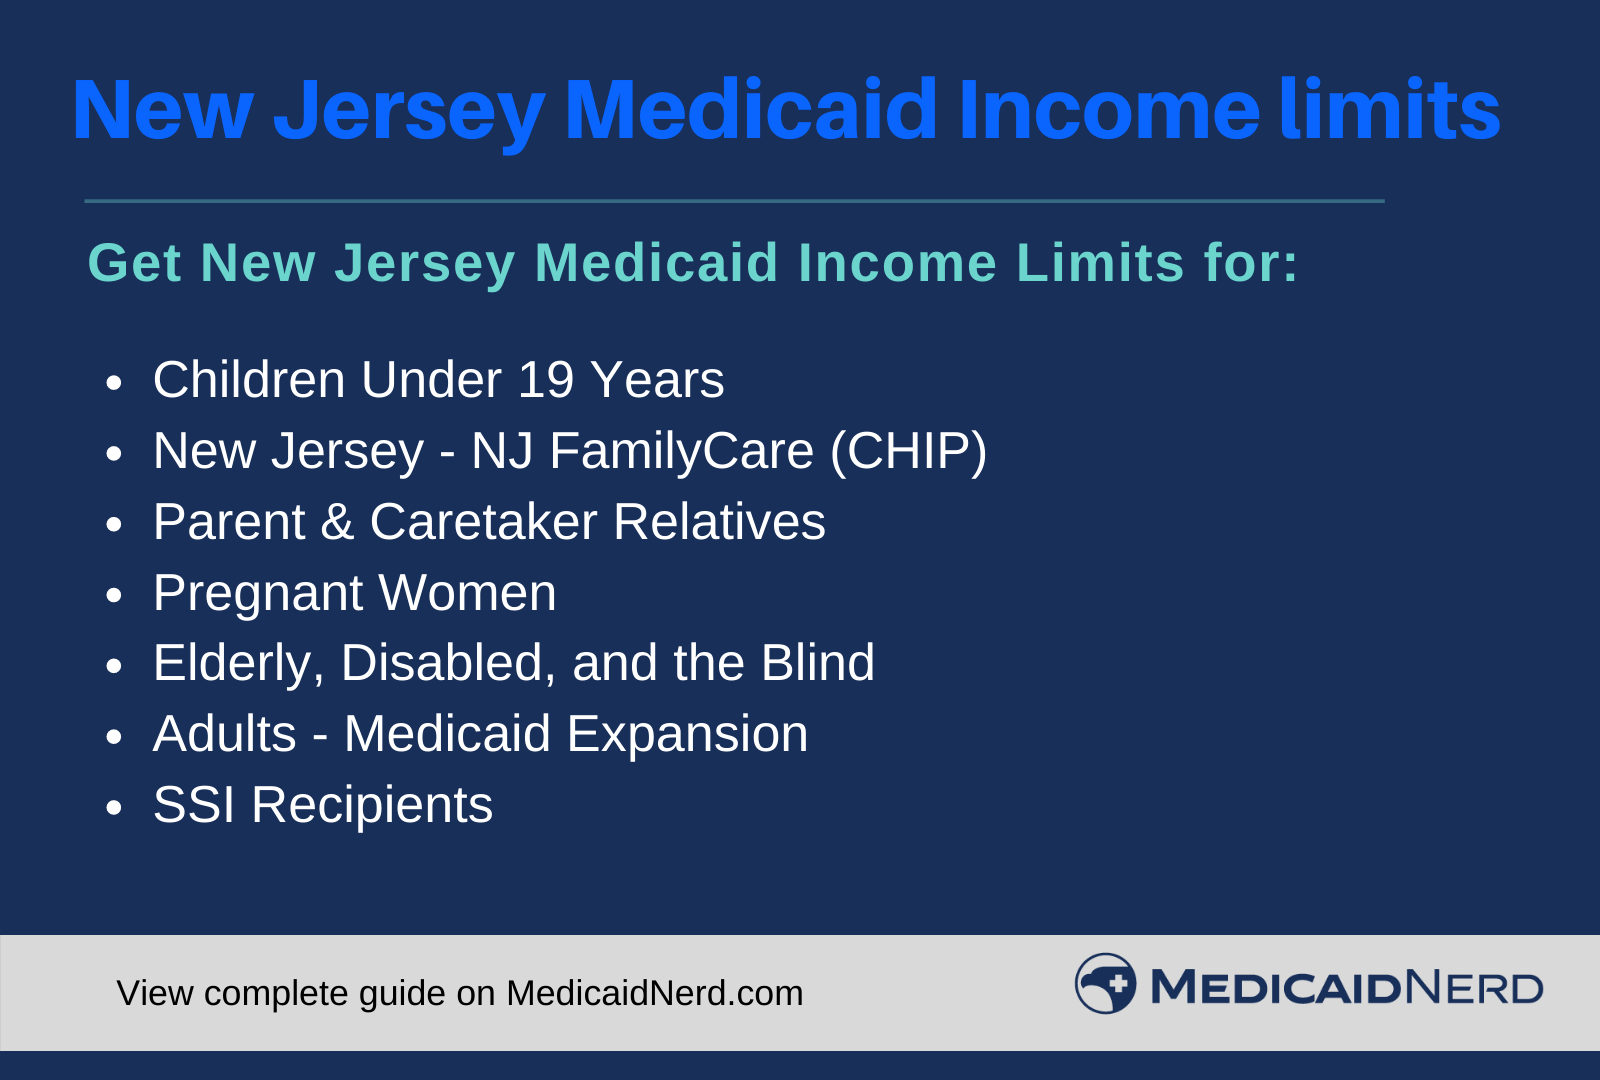 New Jersey Medicaid Income Limits